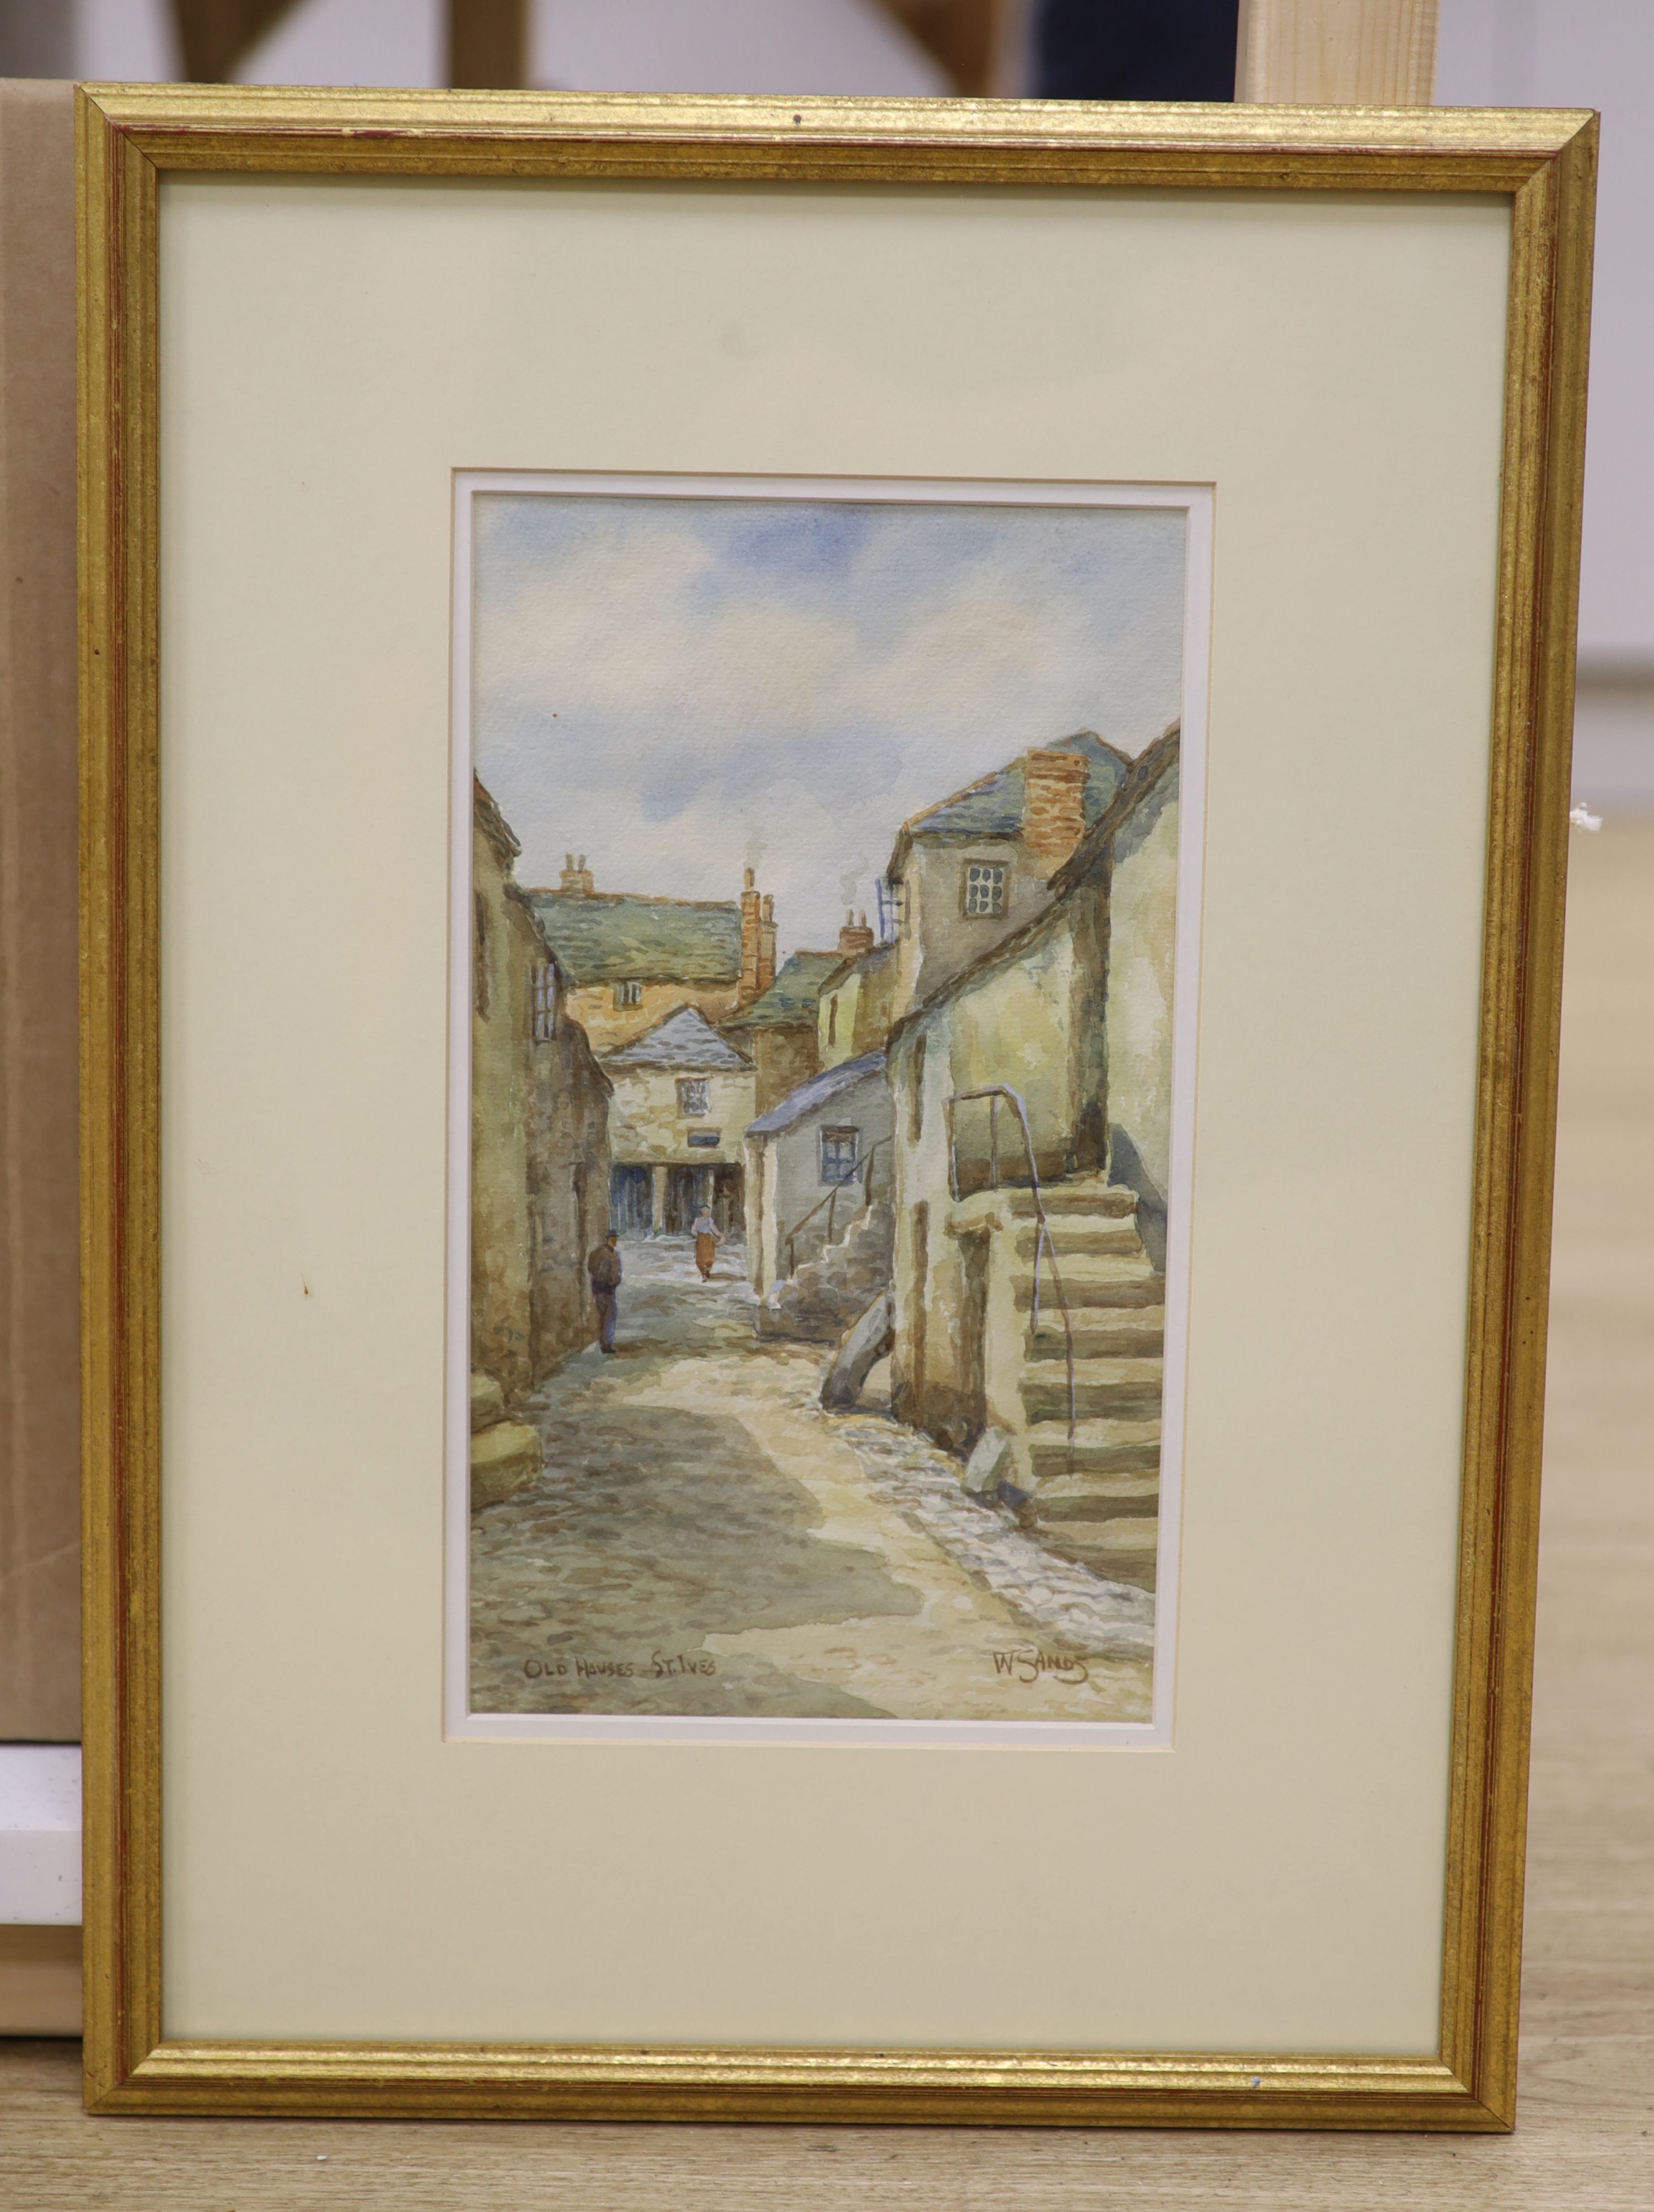 W. Sands, watercolour, Old Houses, St Ives, signed, 29 x 16.5cm